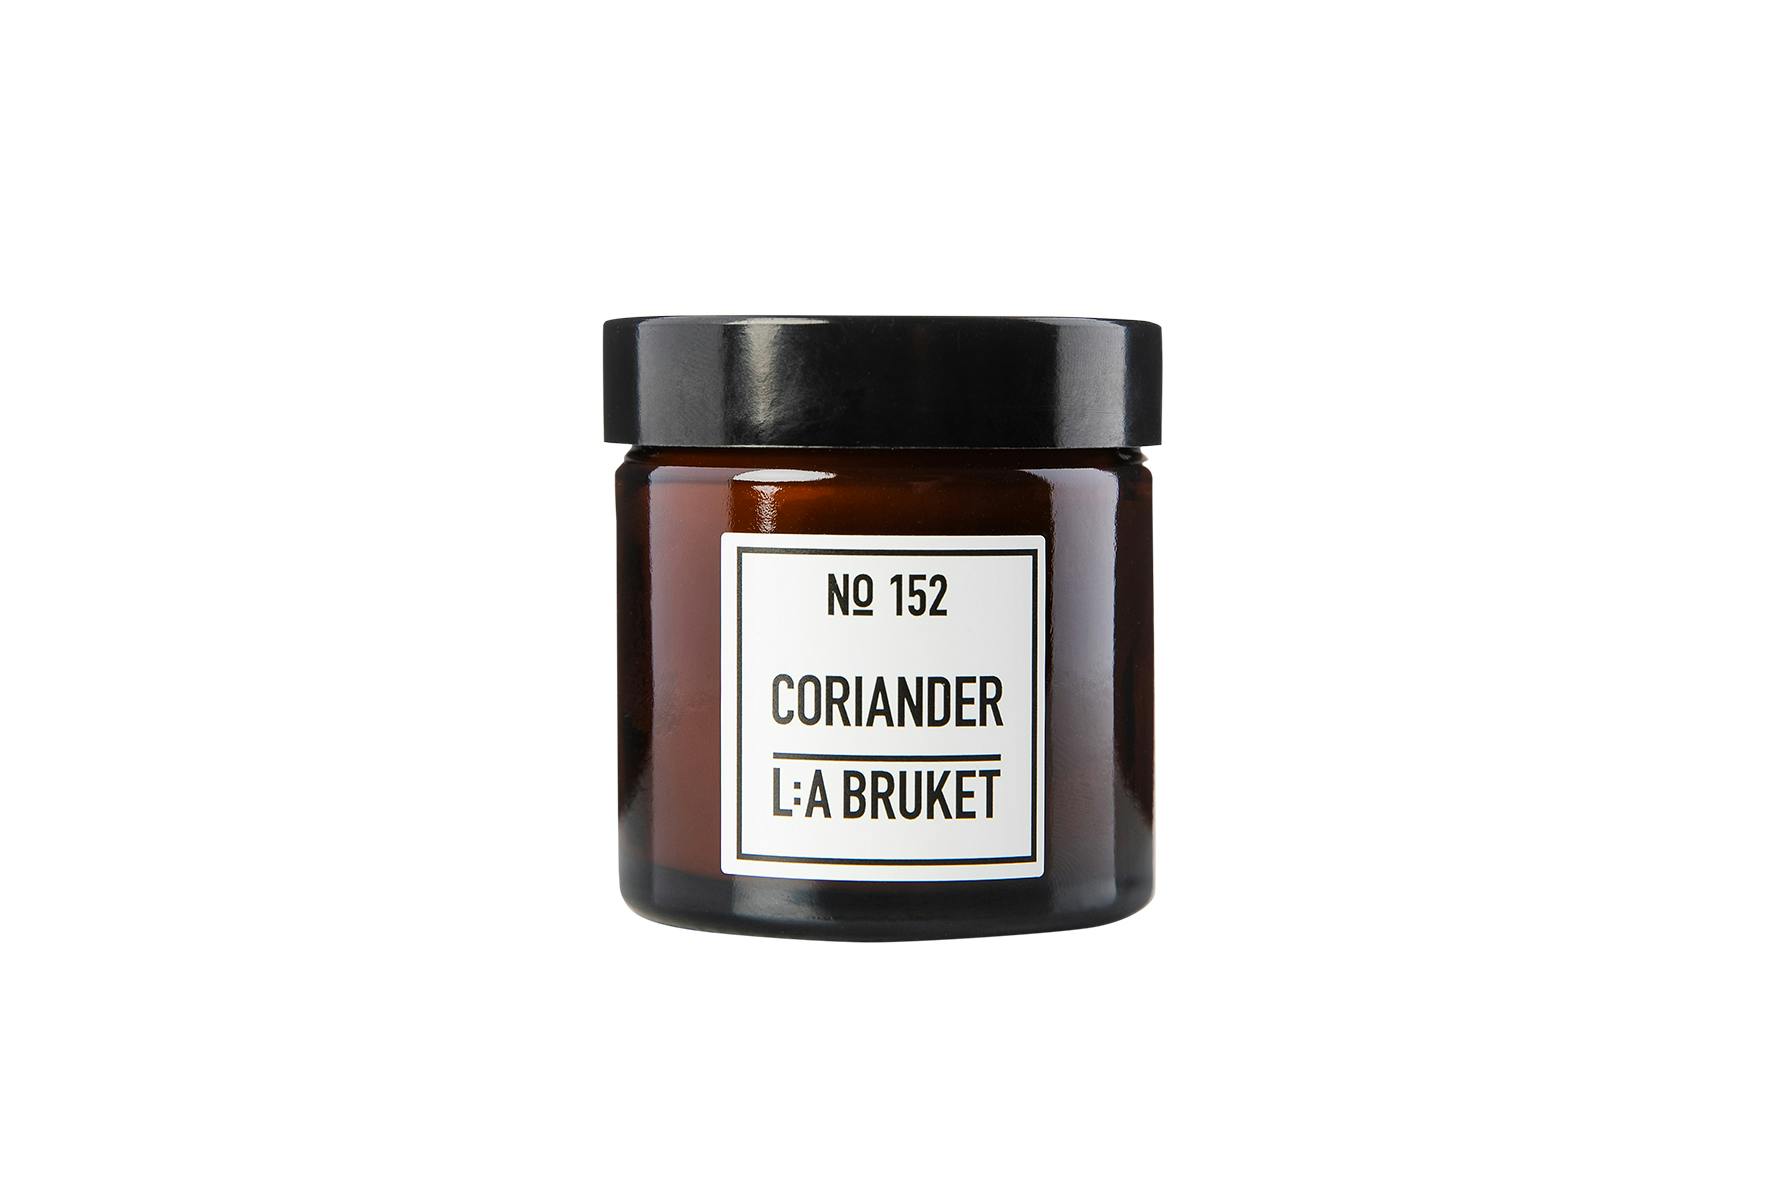 L:A Bruket candle, Scandi home. vegan candle, coriander, natural candles, organic, Nordic style